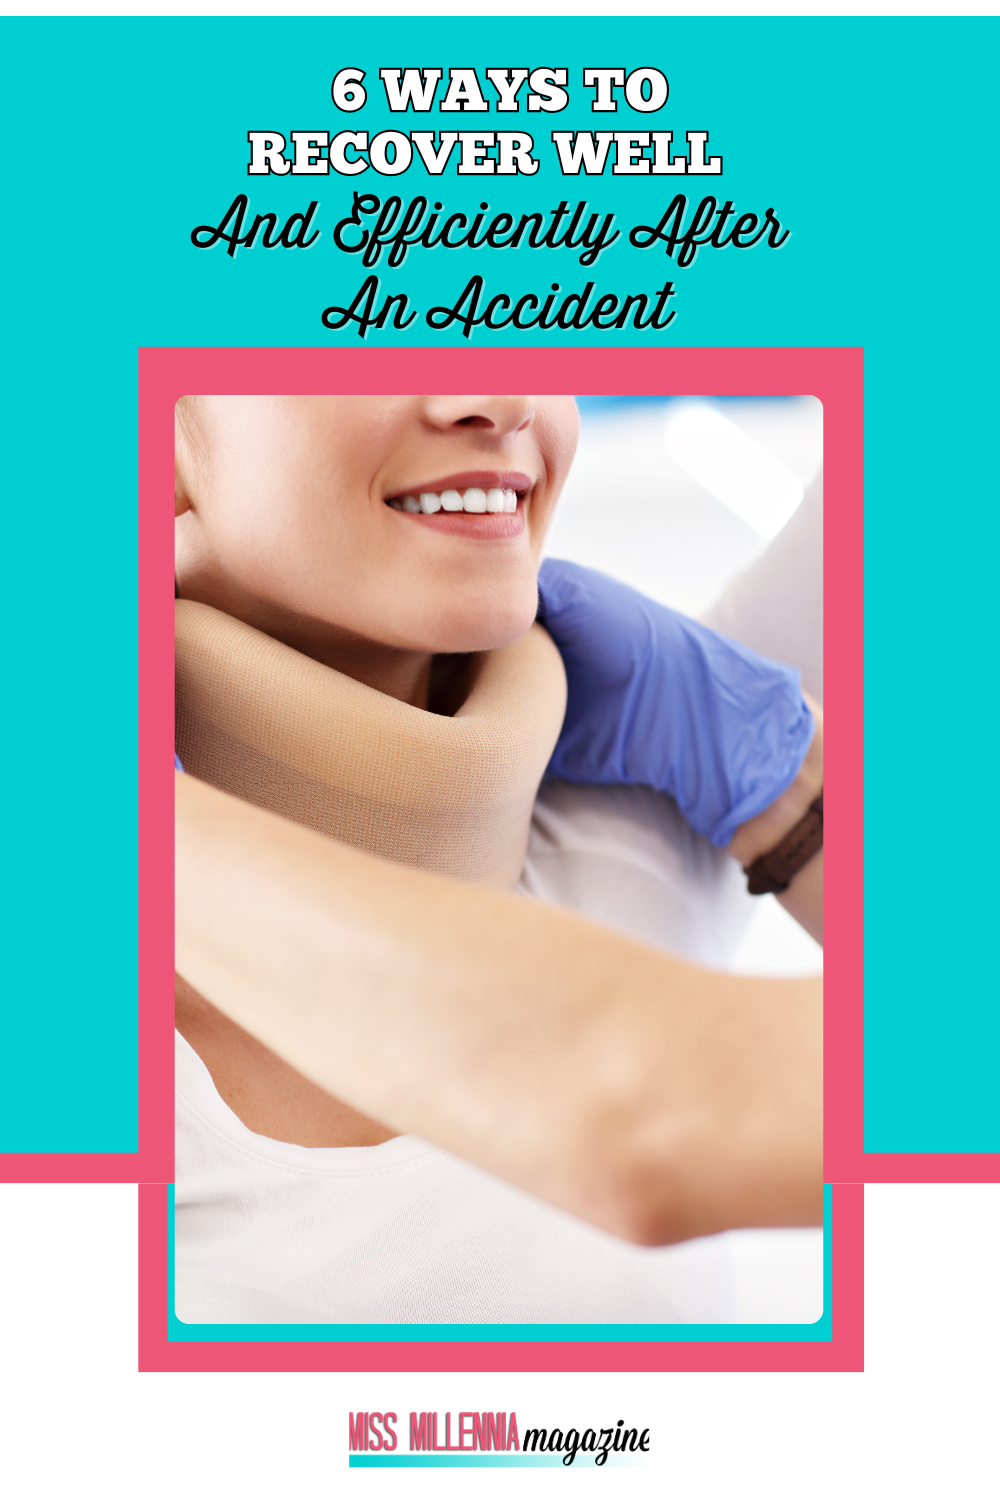 6 Ways To Recover Well And Efficiently After An Accident